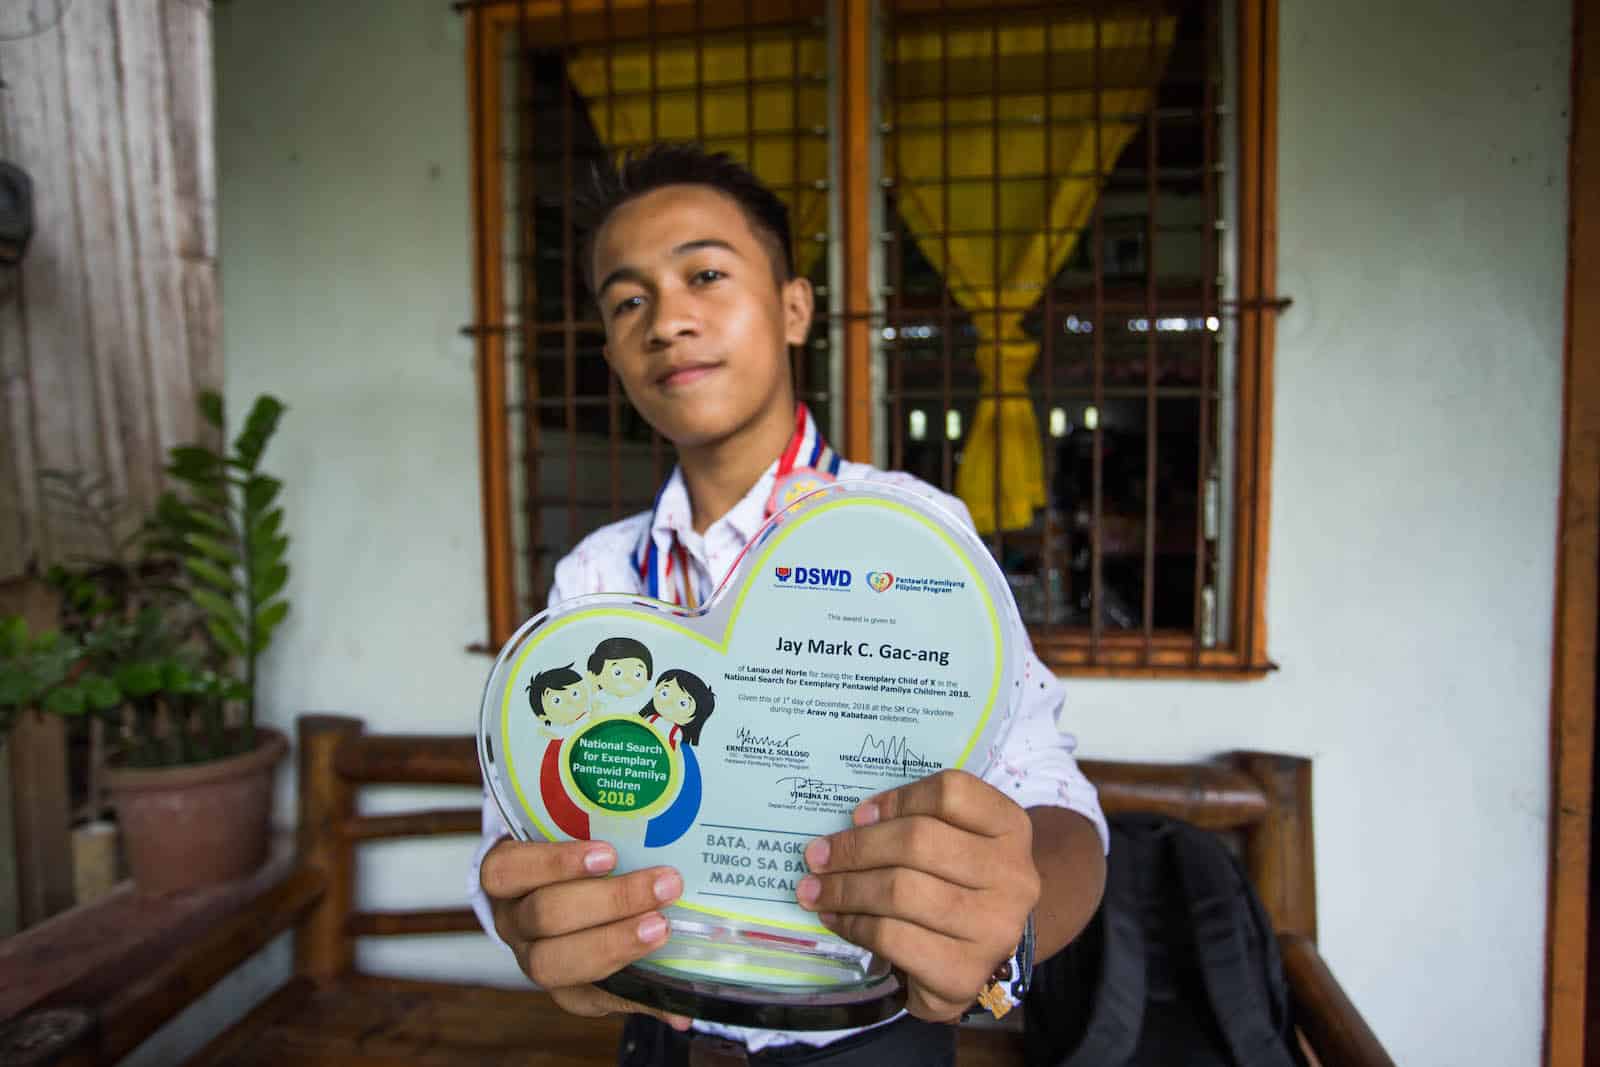 A teen boy stands outside a window, holding an award plaque for the Most Excellent Child in the Philippines.